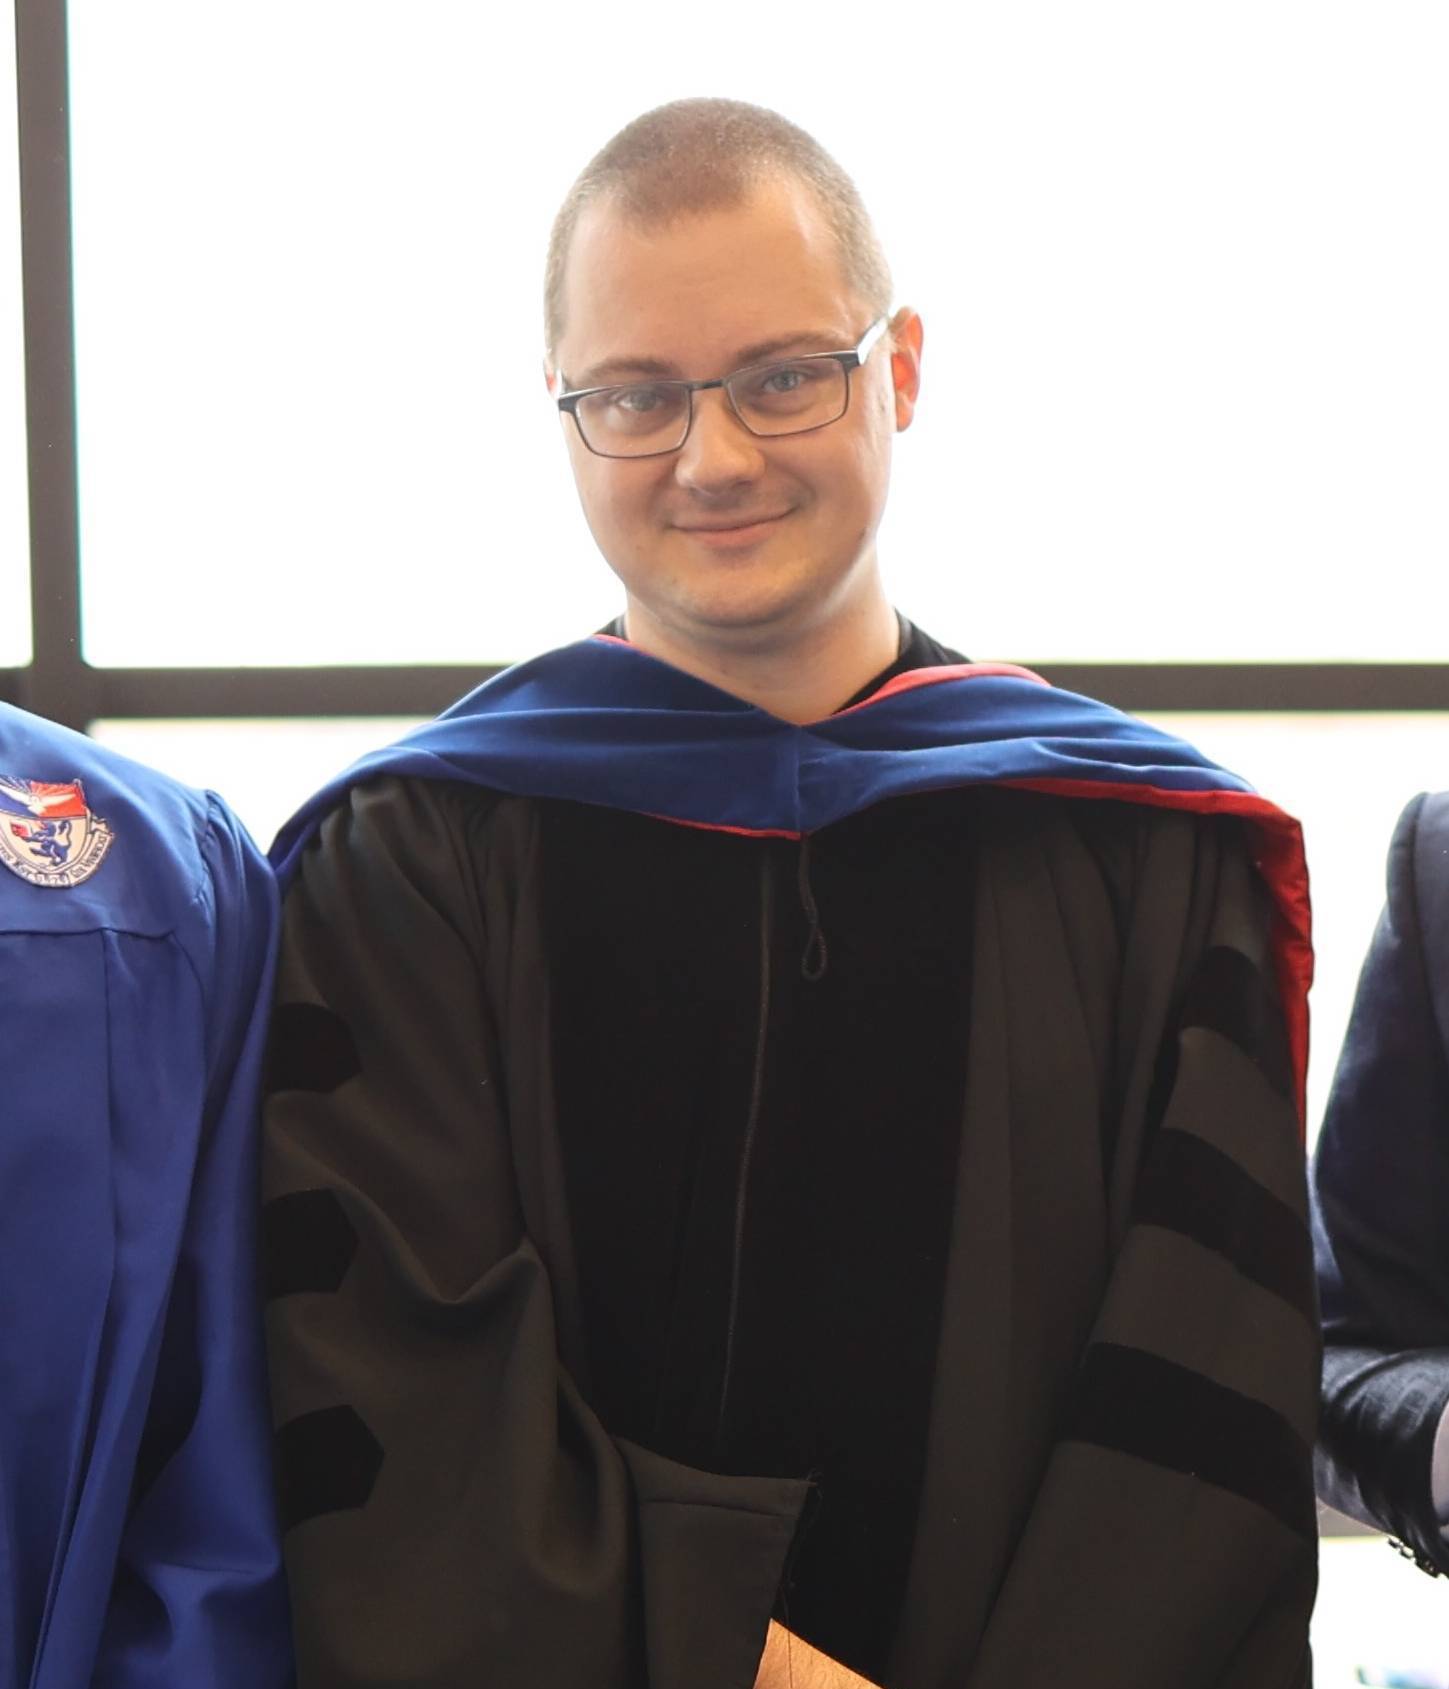 male in a graduation gown